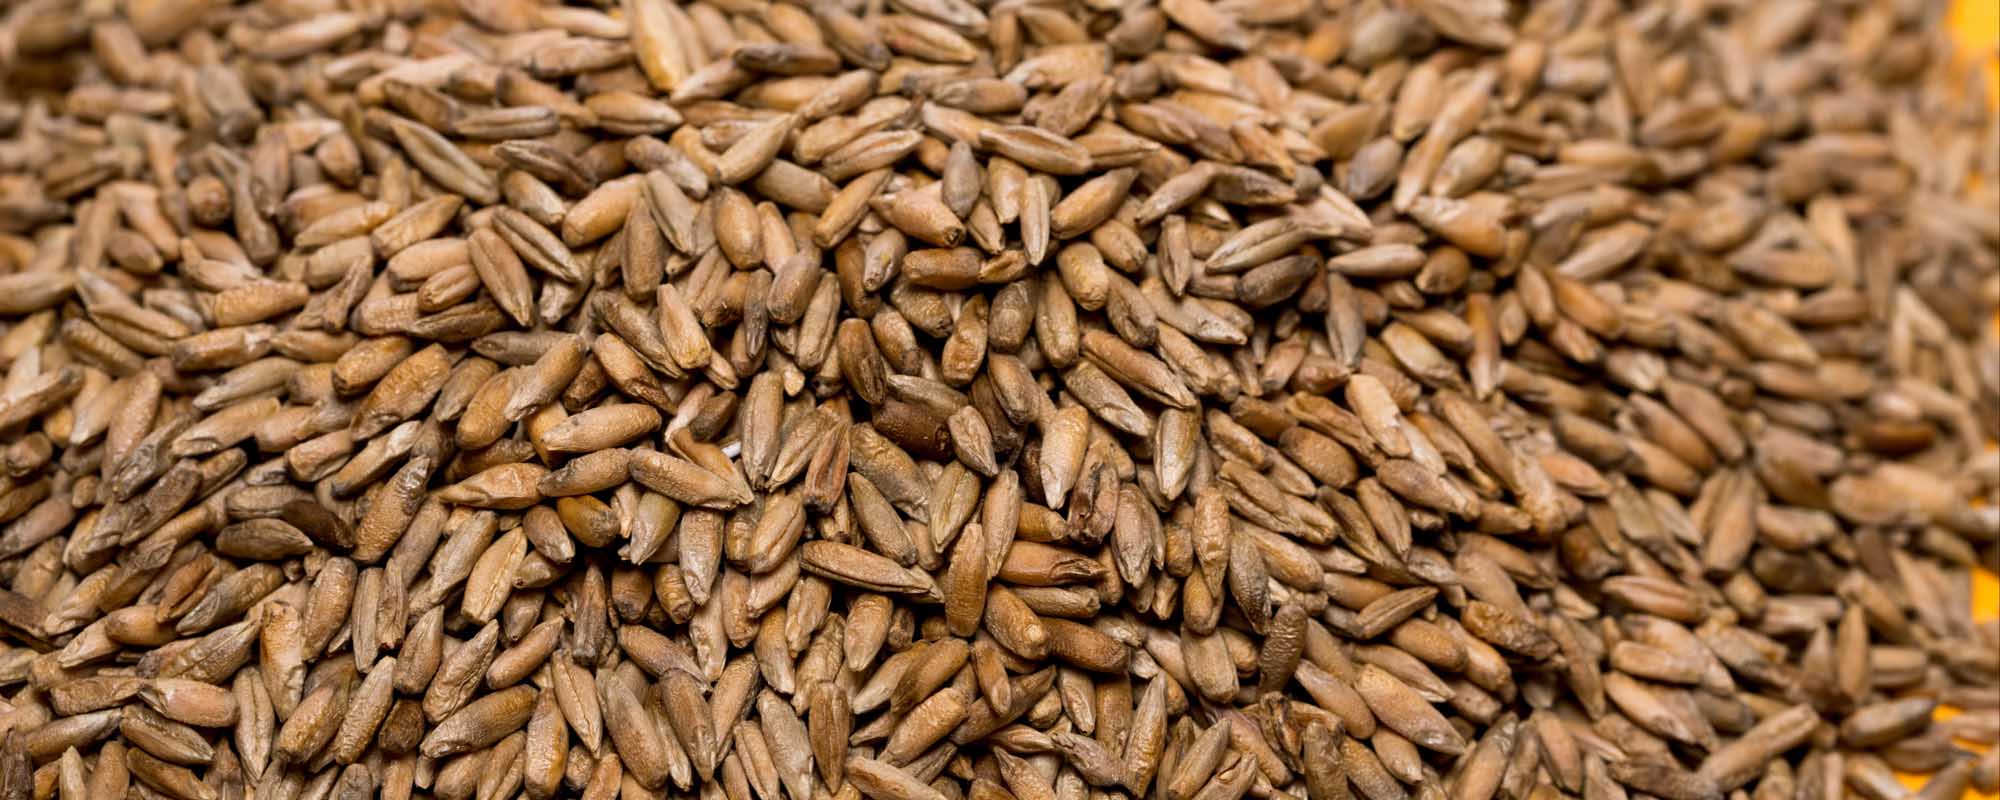 Knowing the Components of Quality Seed can Help Producers Chances of Growing Successful Crops